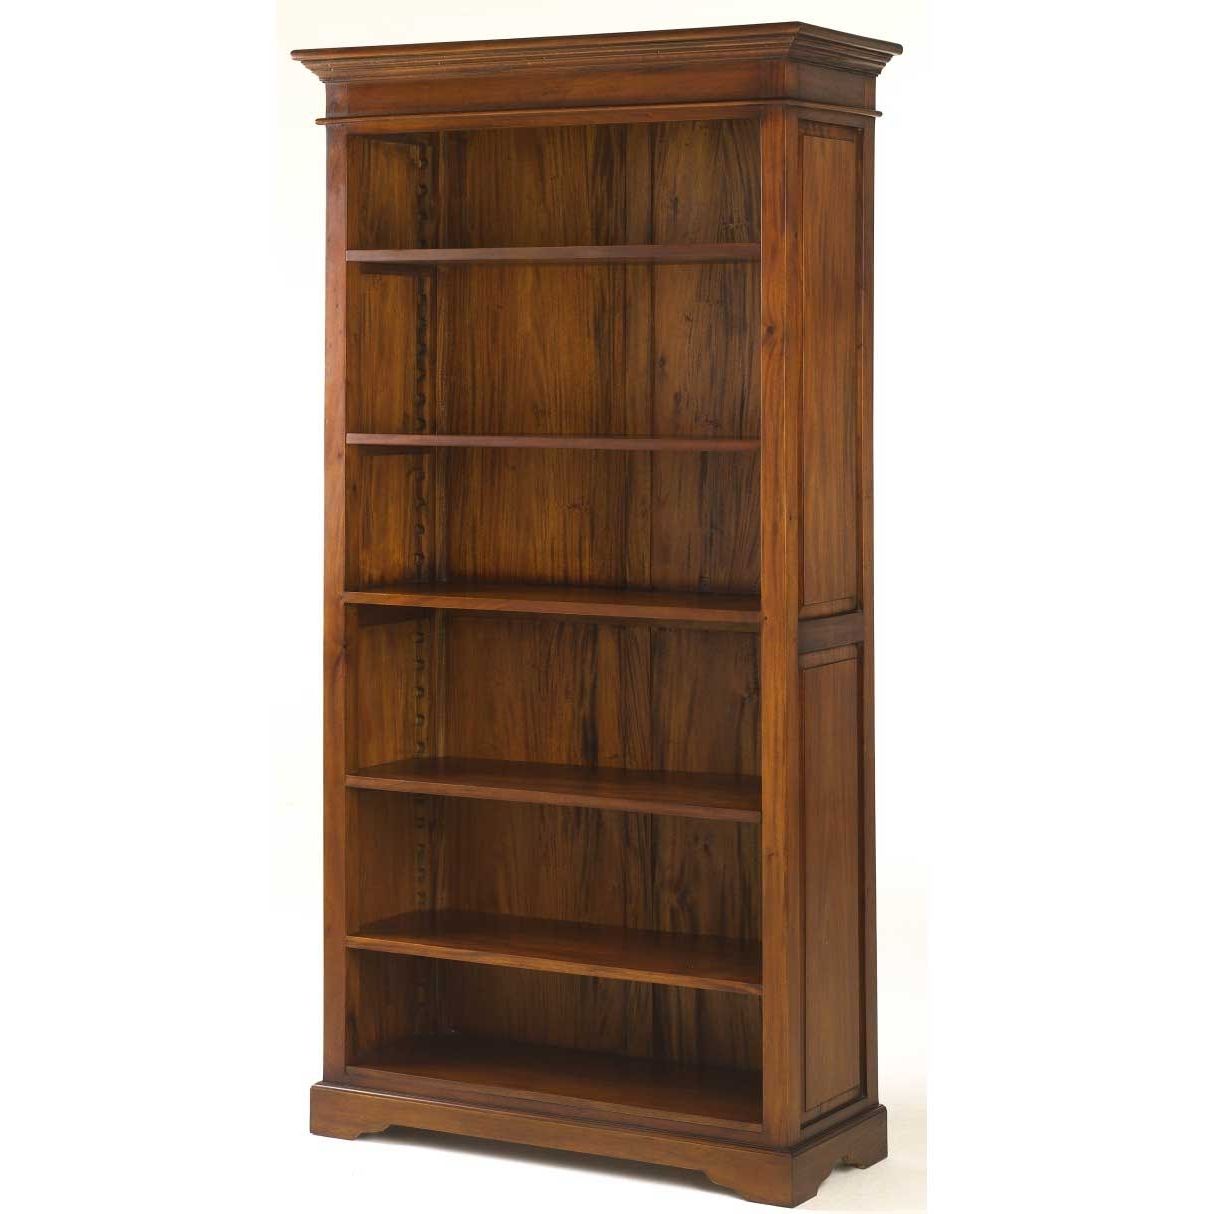 Famous Bookcases Ideas: Ten Real Wood Bookcases With High Quality Mission Regarding High Quality Bookcases (View 1 of 15)